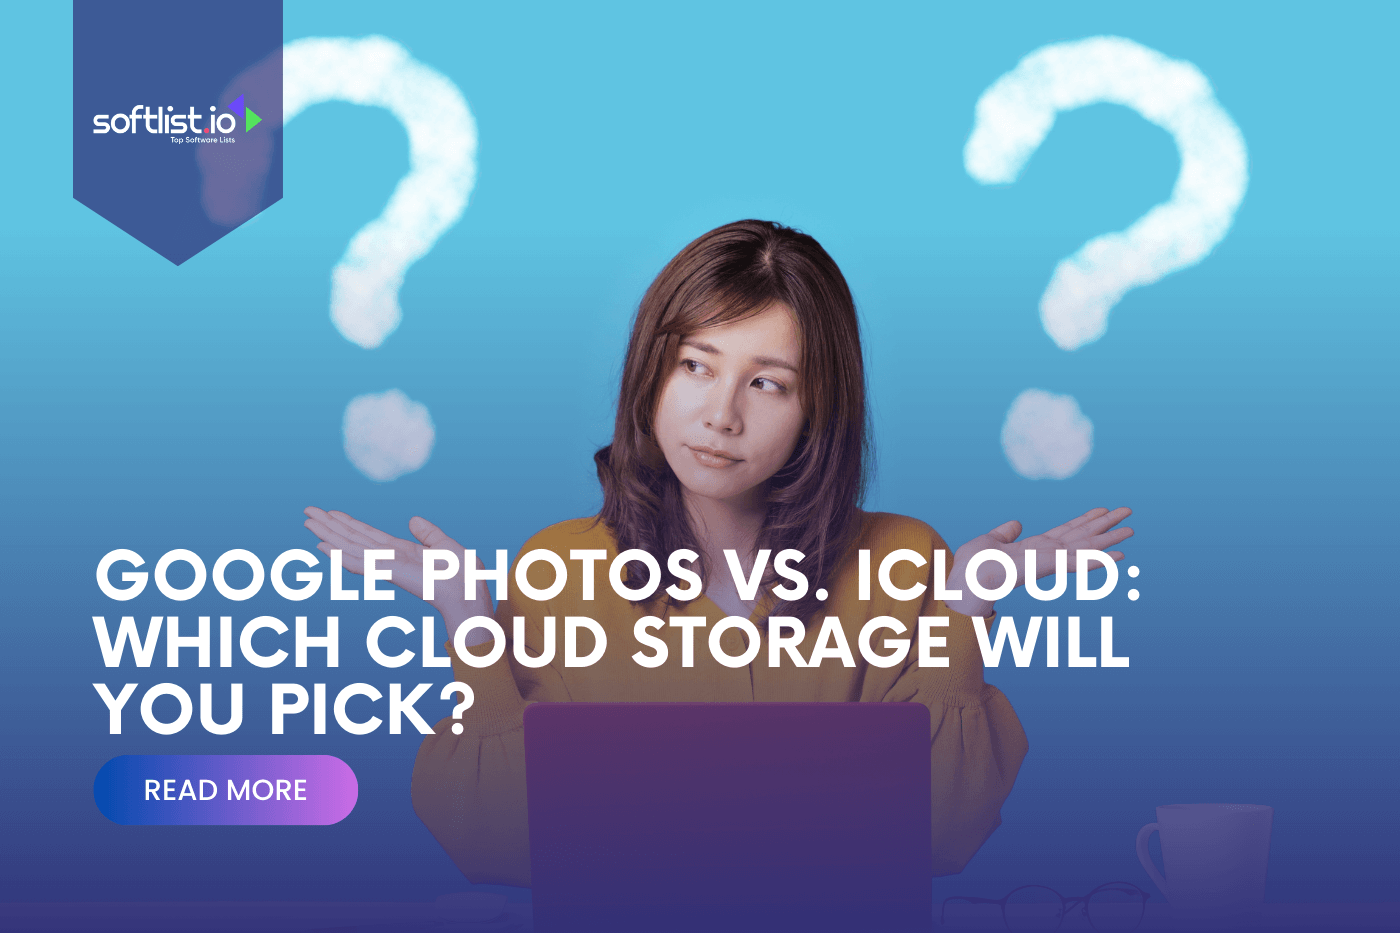 Google Photos vs. iCloud Which Cloud Storage Will You Pick